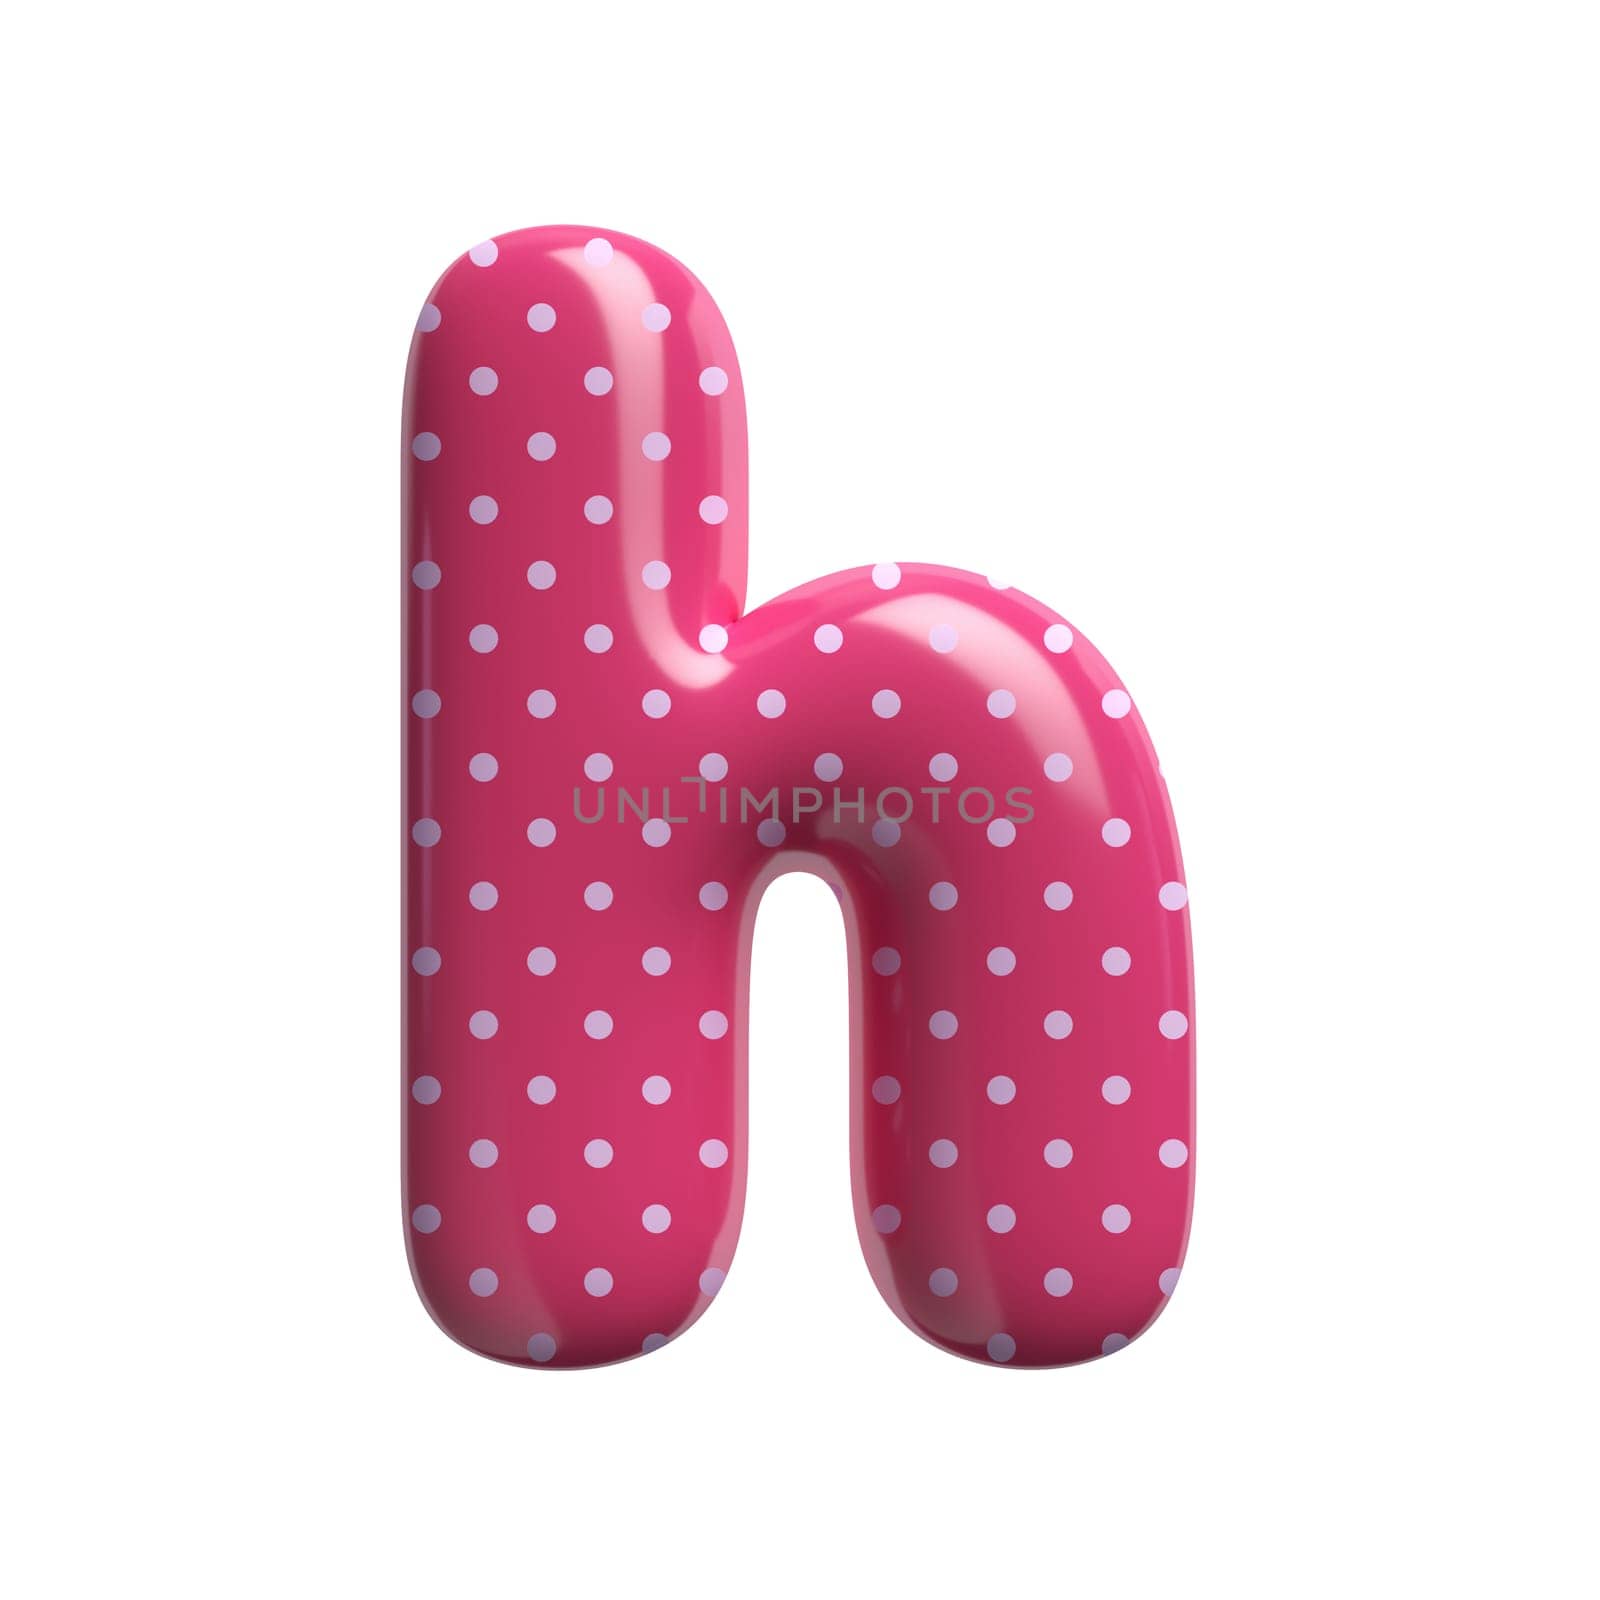 Polka dot letter H - Lower-case 3d pink retro font - Suitable for Fashion, retro design or decoration related subjects by chrisroll